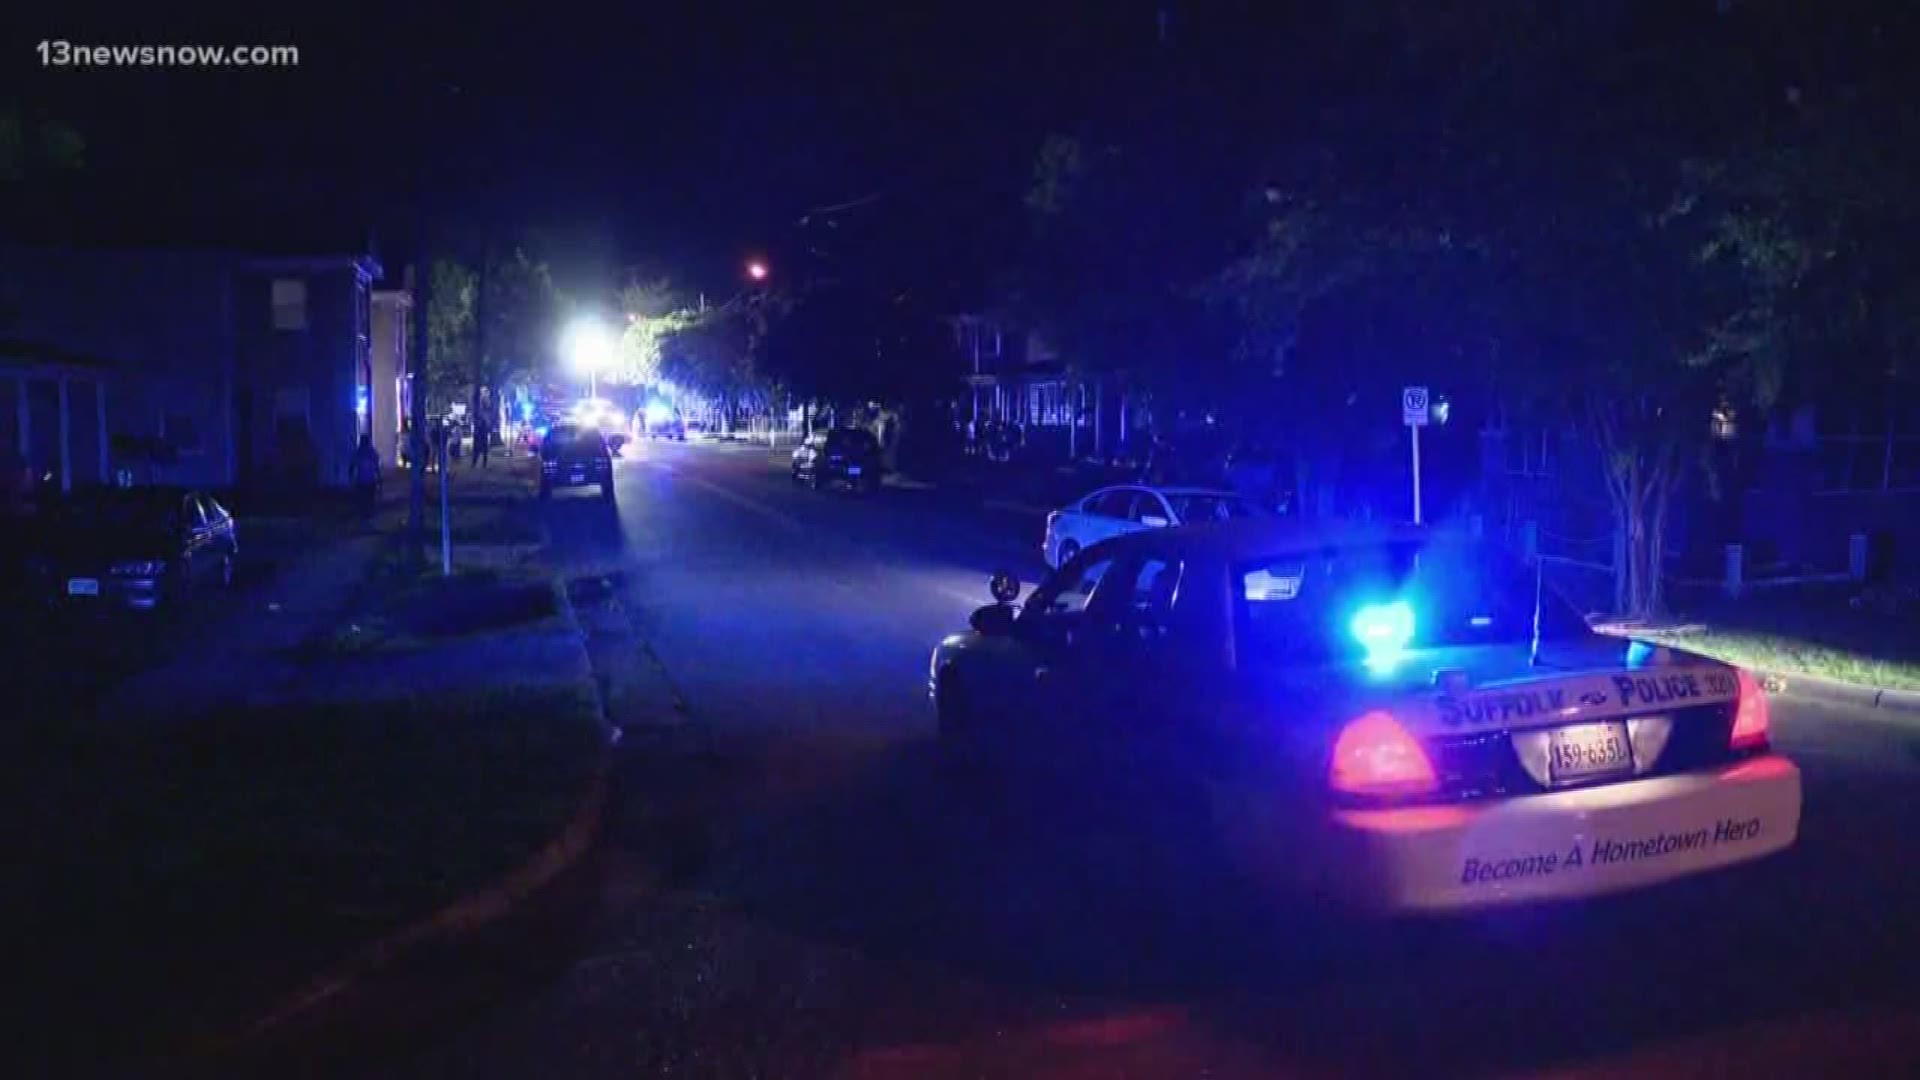 Police ID 2 people killed, 3 hurt in domestic-related shootings in Downtown Suffolk